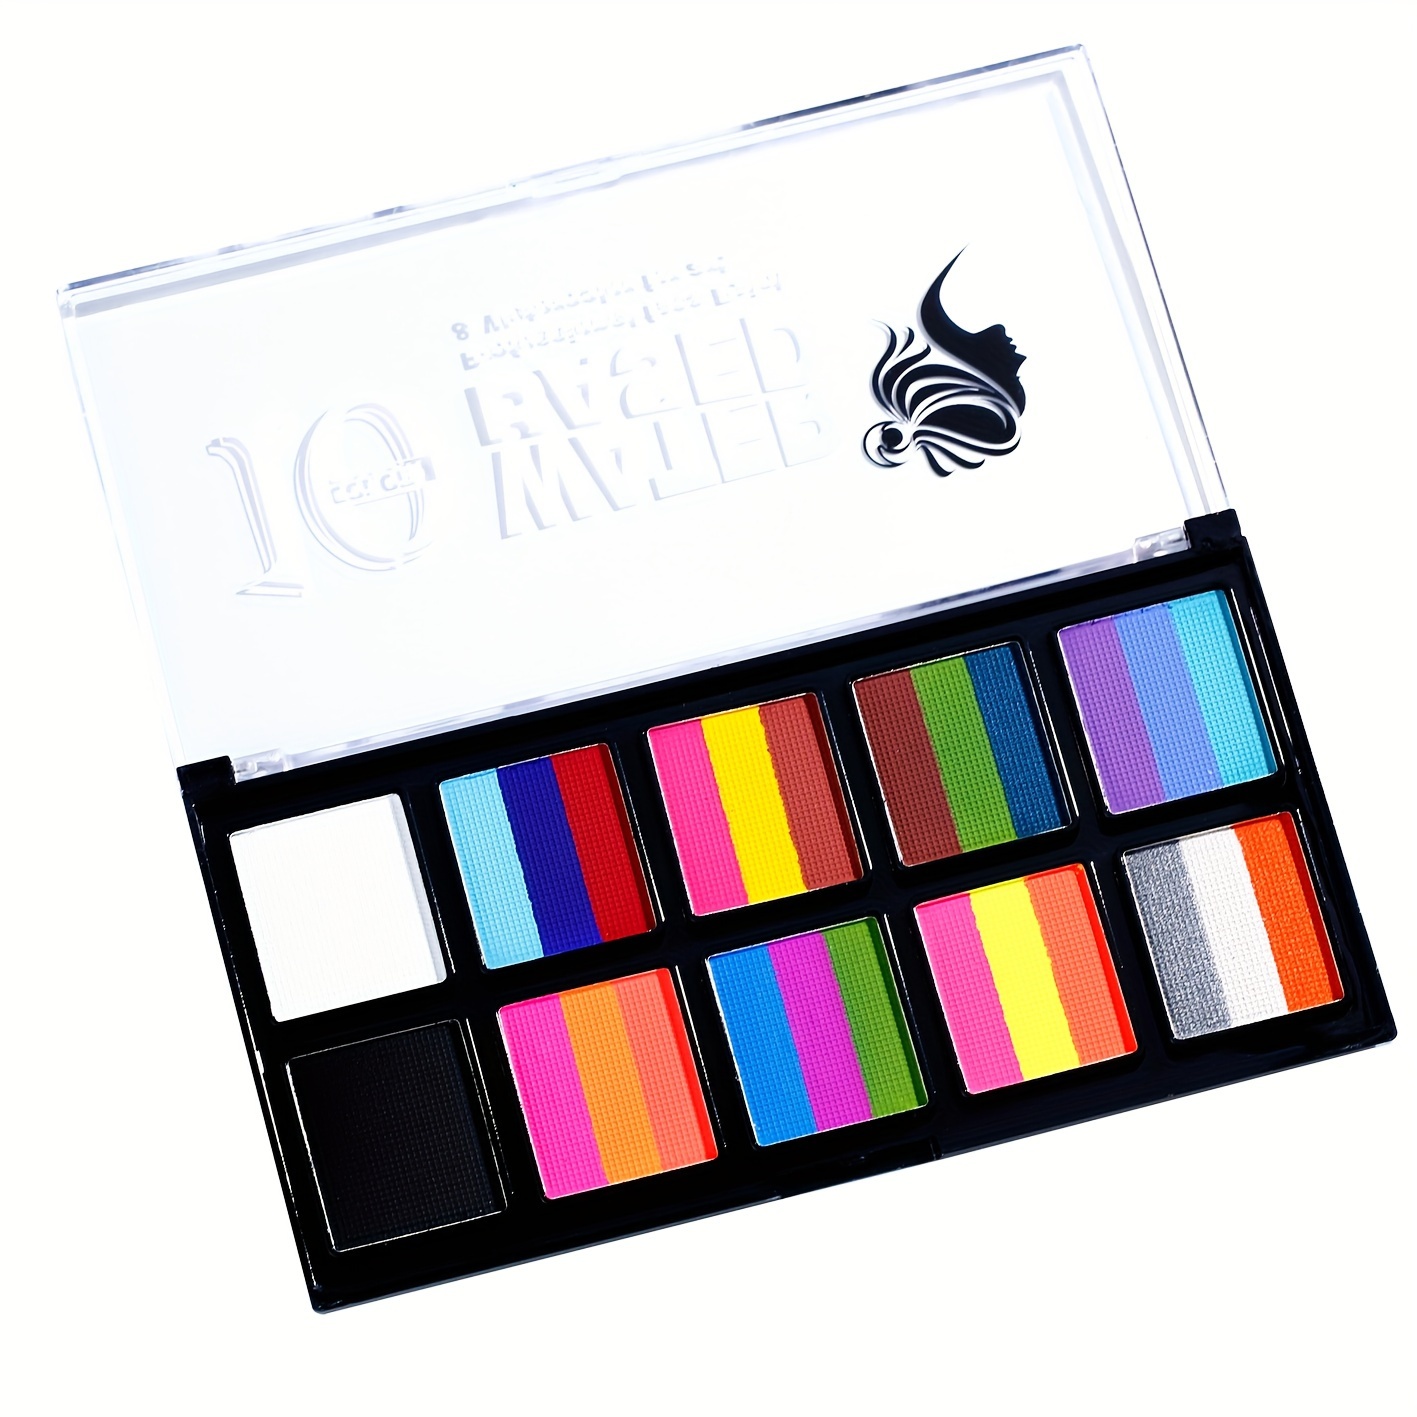 

10 Grids, 3-color Block, Body Painting High Pigment Colorful Makeup Palette, Festival Stage Party Face Body Art Makeup Powder, Ideal For Halloween Christmas Cosplay